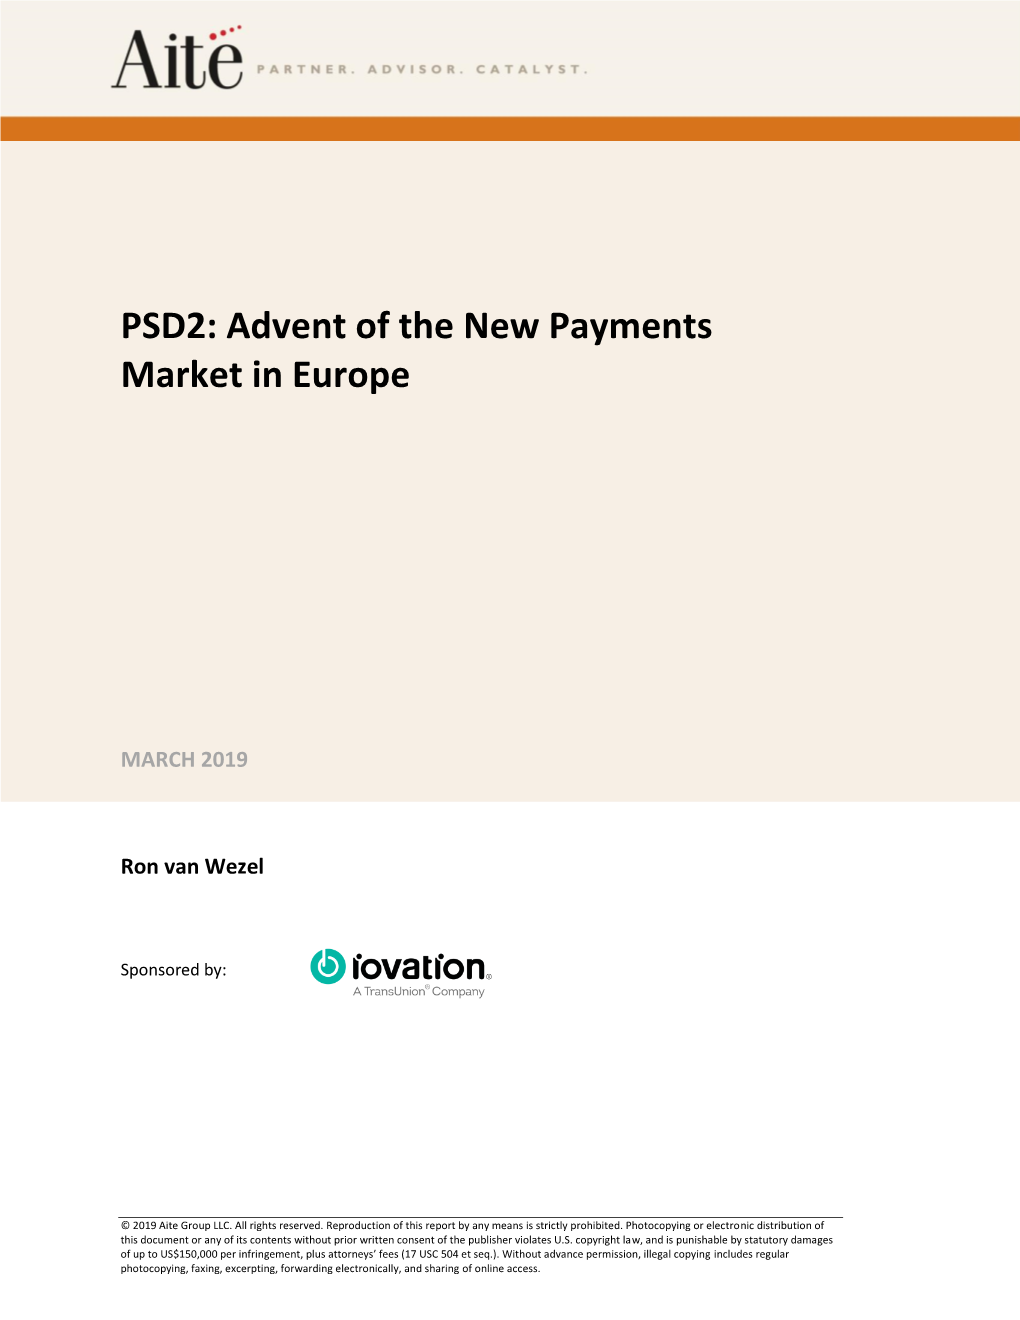 PSD2: Advent of the New Payments Market in Europe